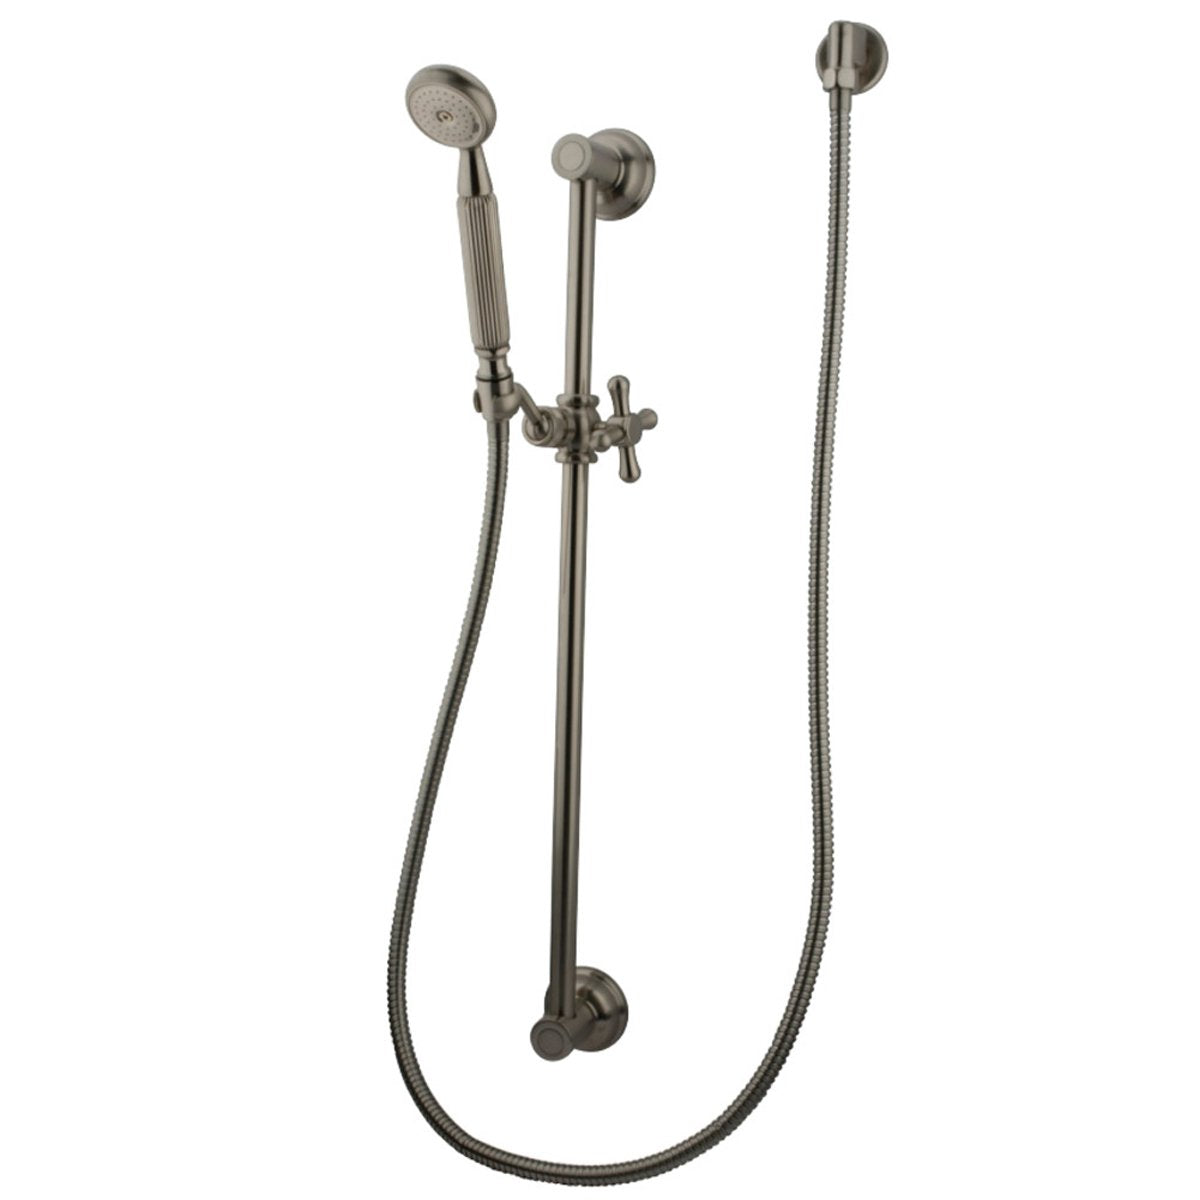 Kingston Brass Made to Match Wall Mount Shower Combo